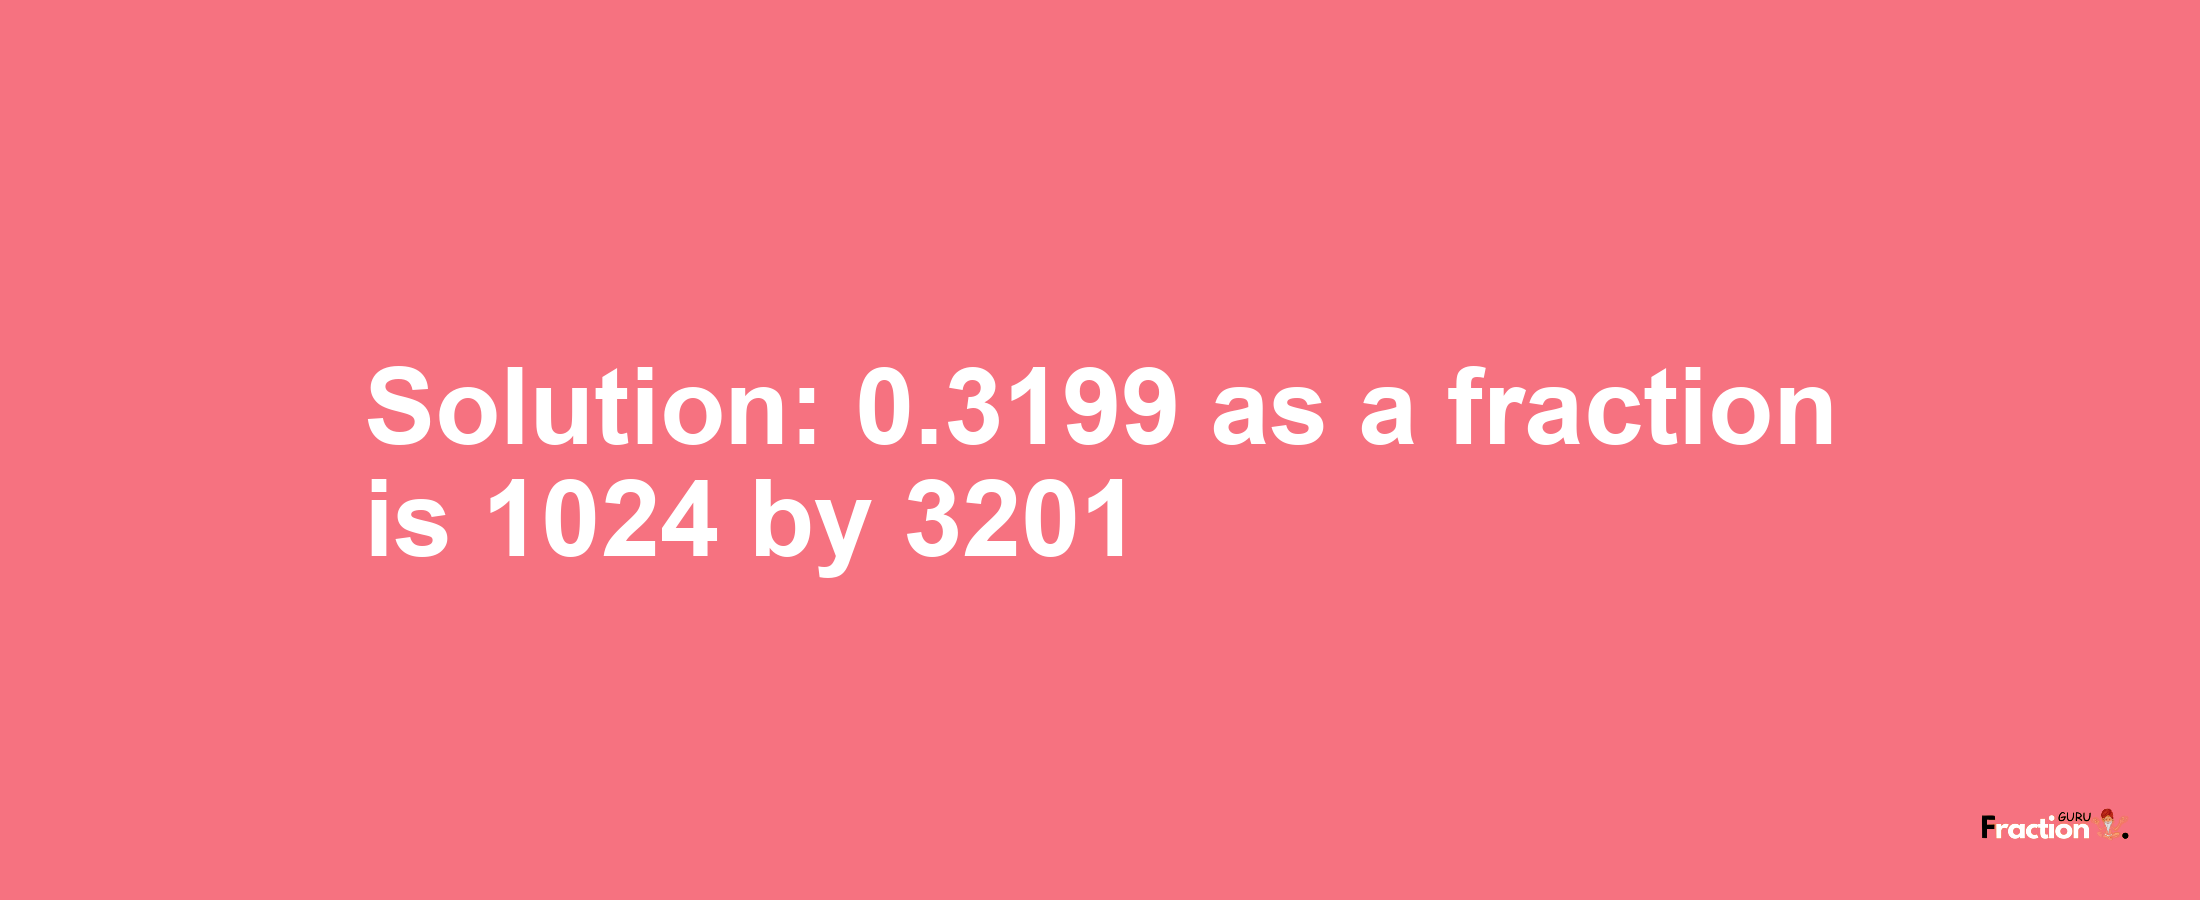 Solution:0.3199 as a fraction is 1024/3201